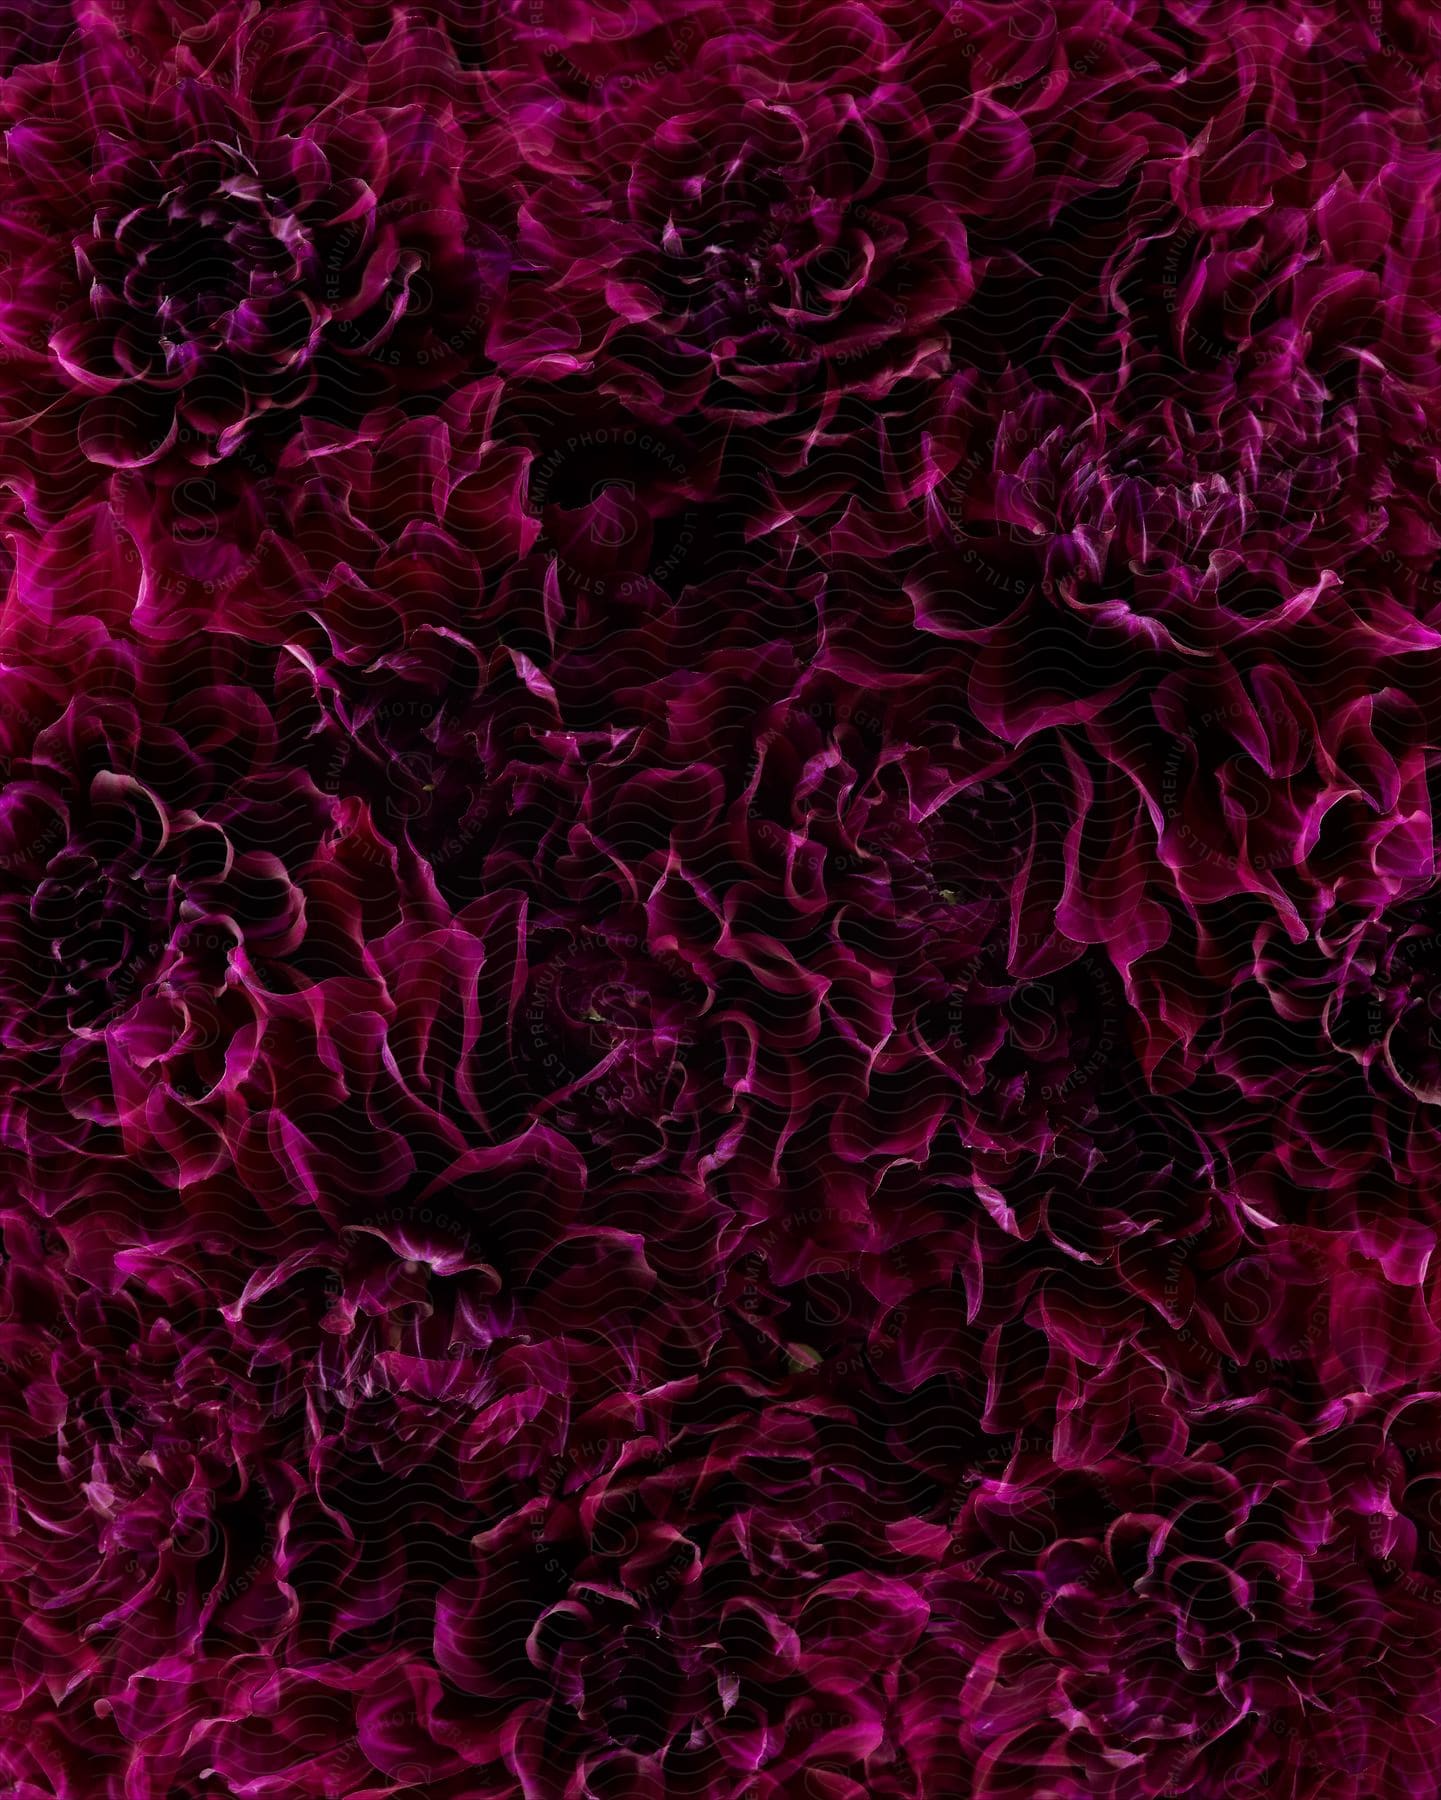 Deep purple rosettes bunched together in a closeup top perspective